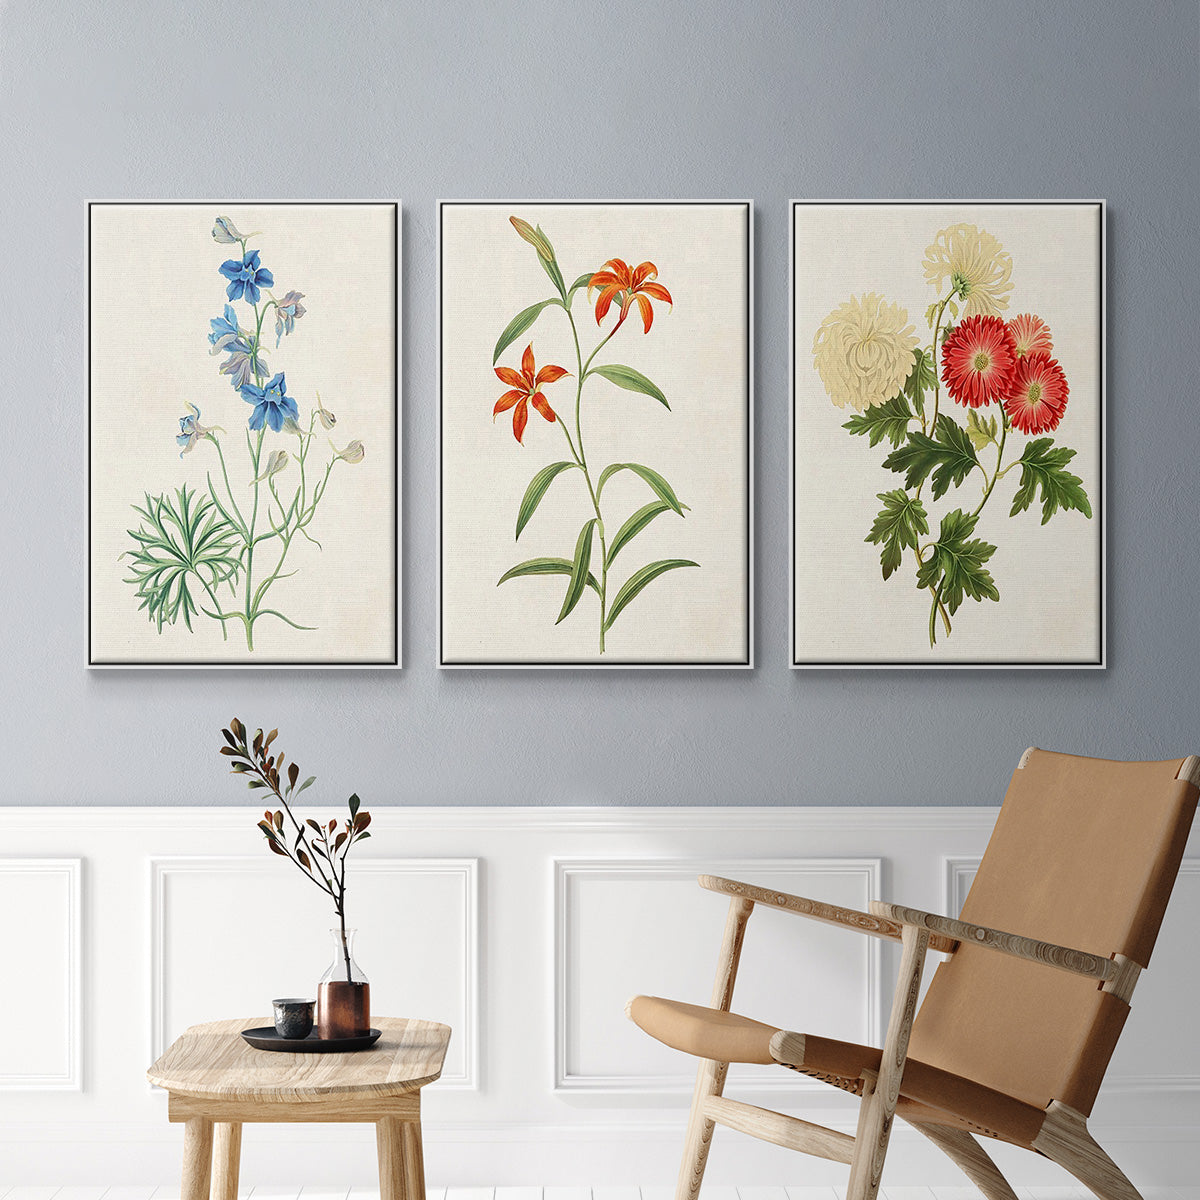 Flowers of the Seasons I - Framed Premium Gallery Wrapped Canvas L Frame 3 Piece Set - Ready to Hang